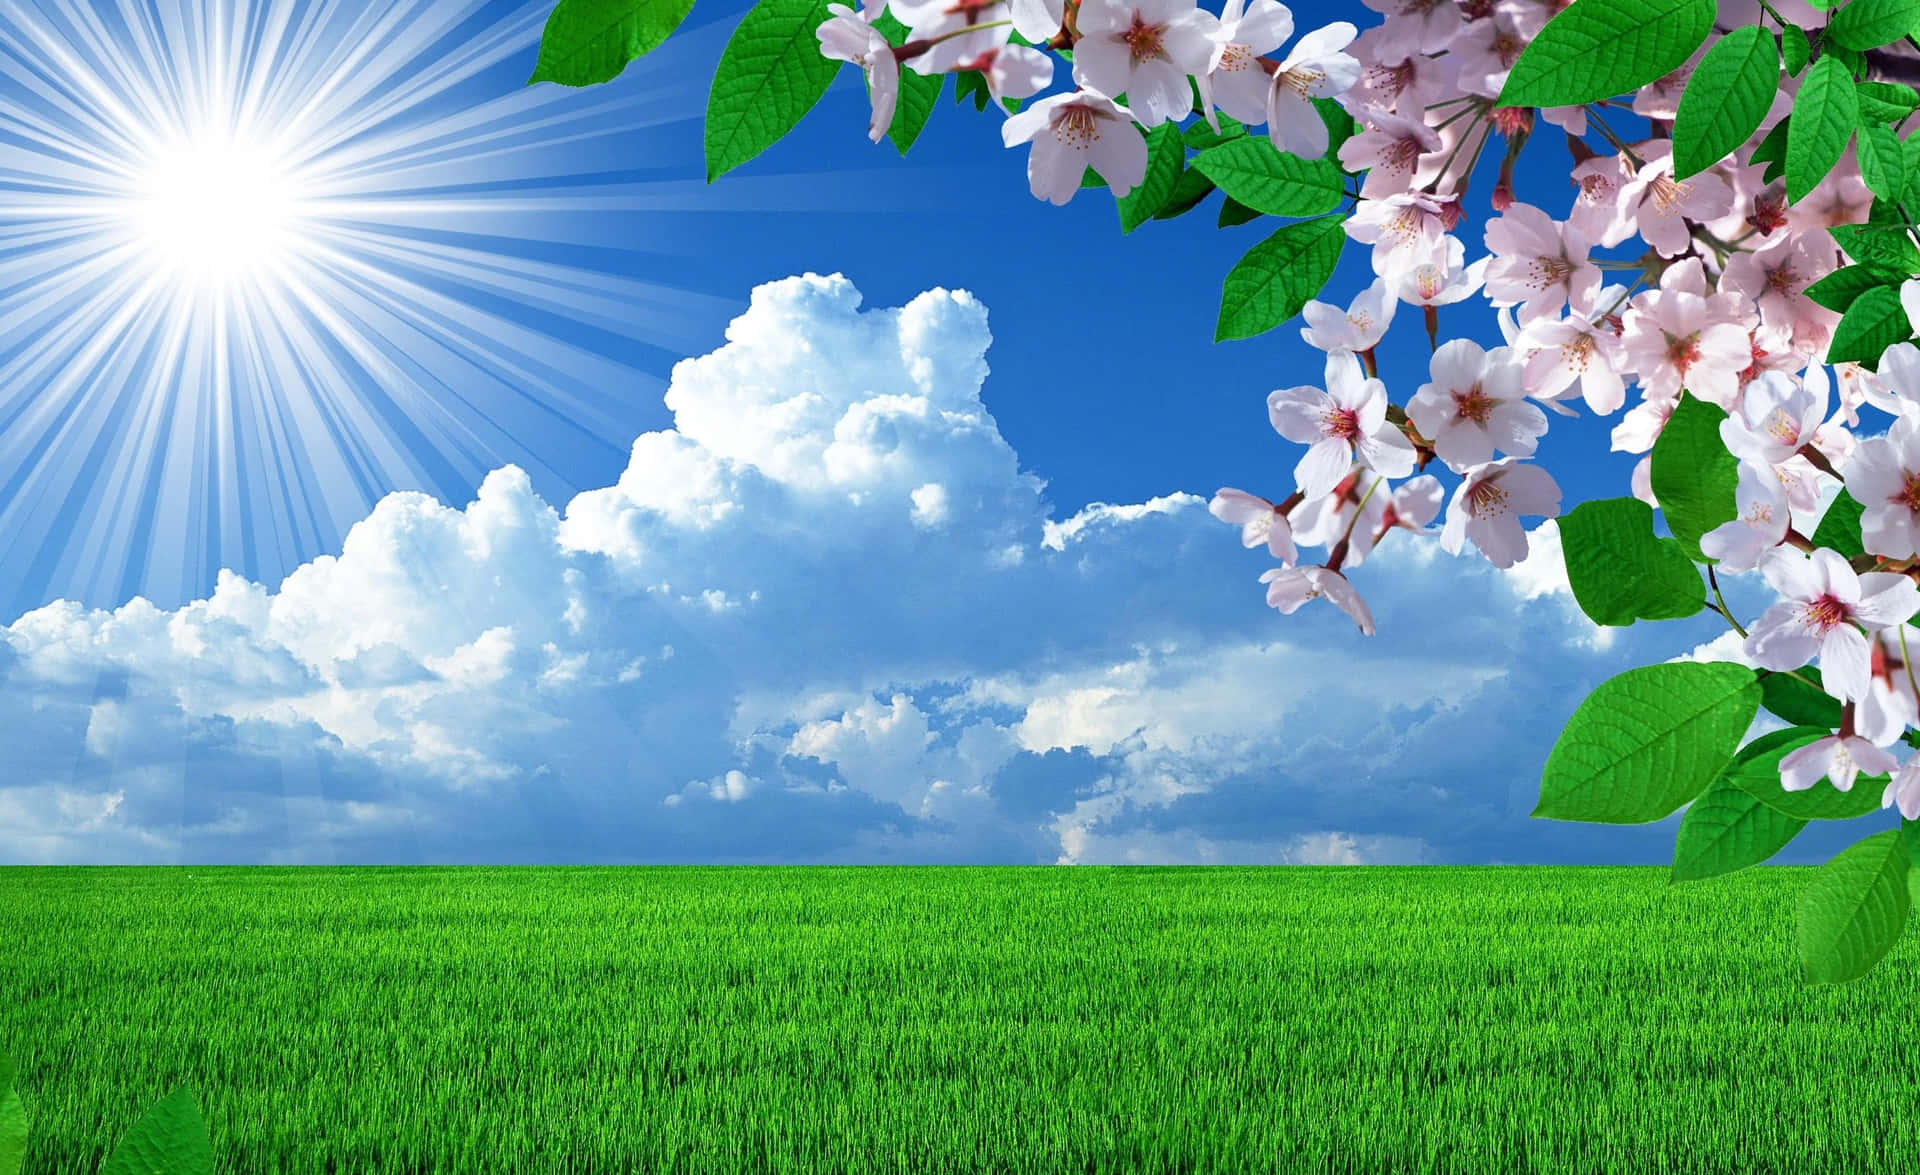 Caption: Beautiful Spring Sky with Lush Green Nature Wallpaper